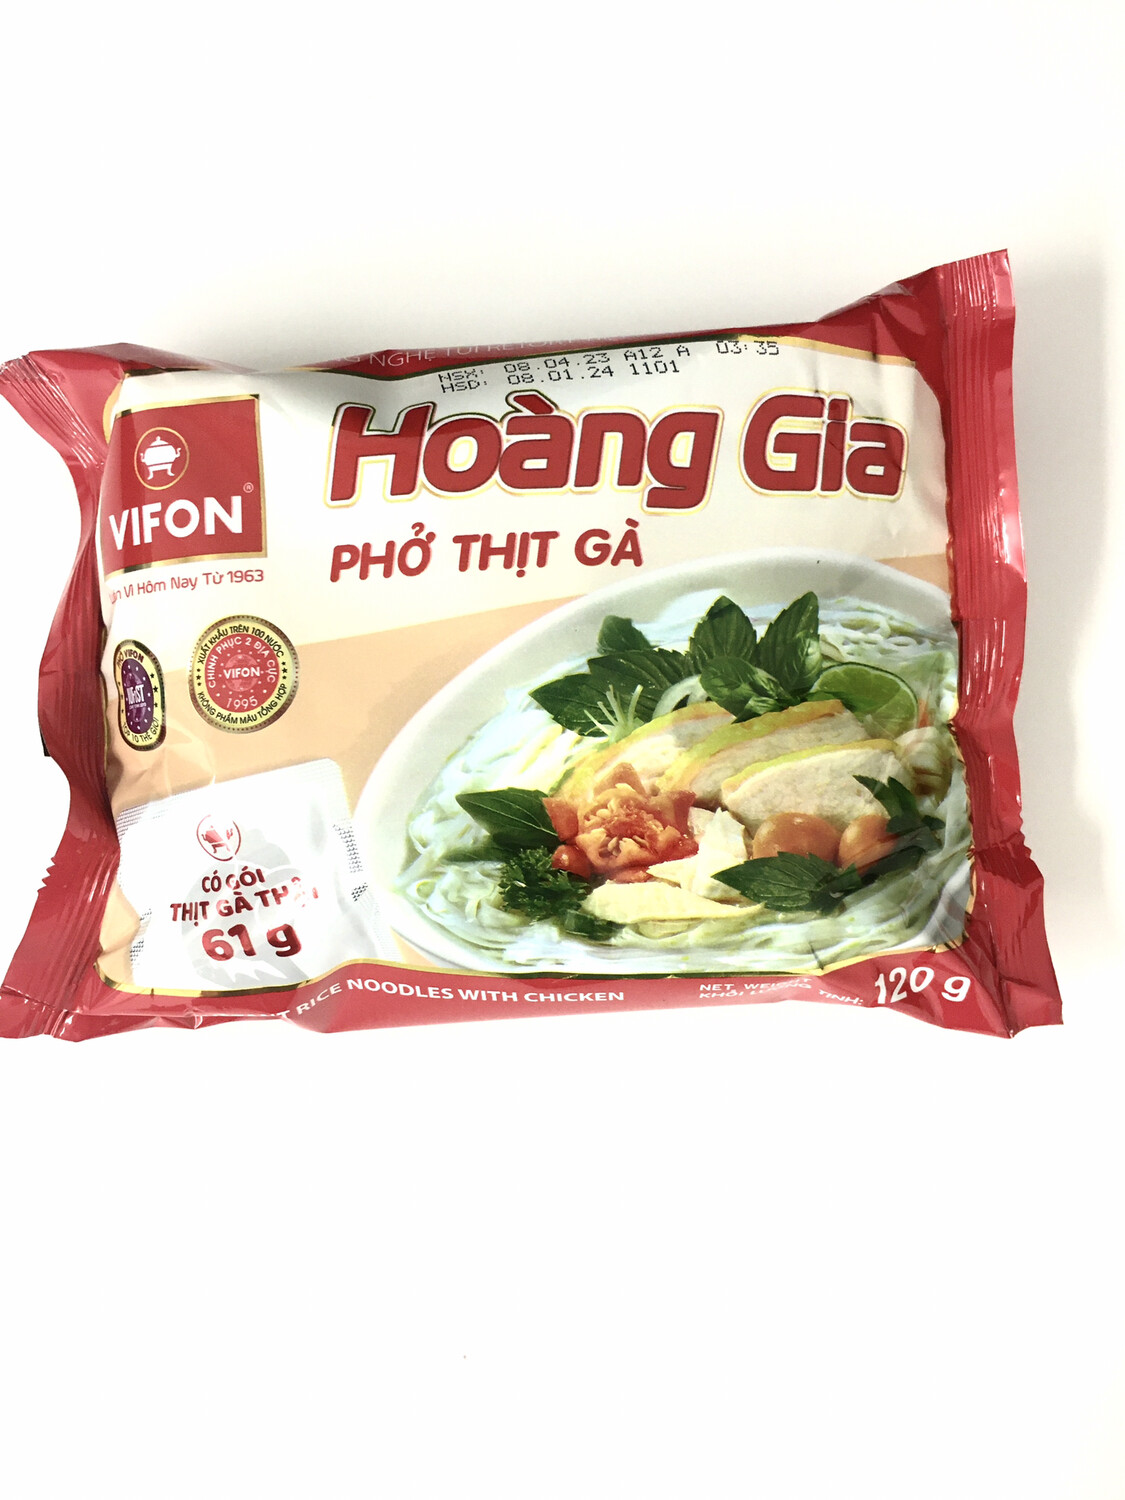 VIFON HOANG GIA INSTANT RICE NOODLES WITH CHICKEN PHO THIT GA 18X120G